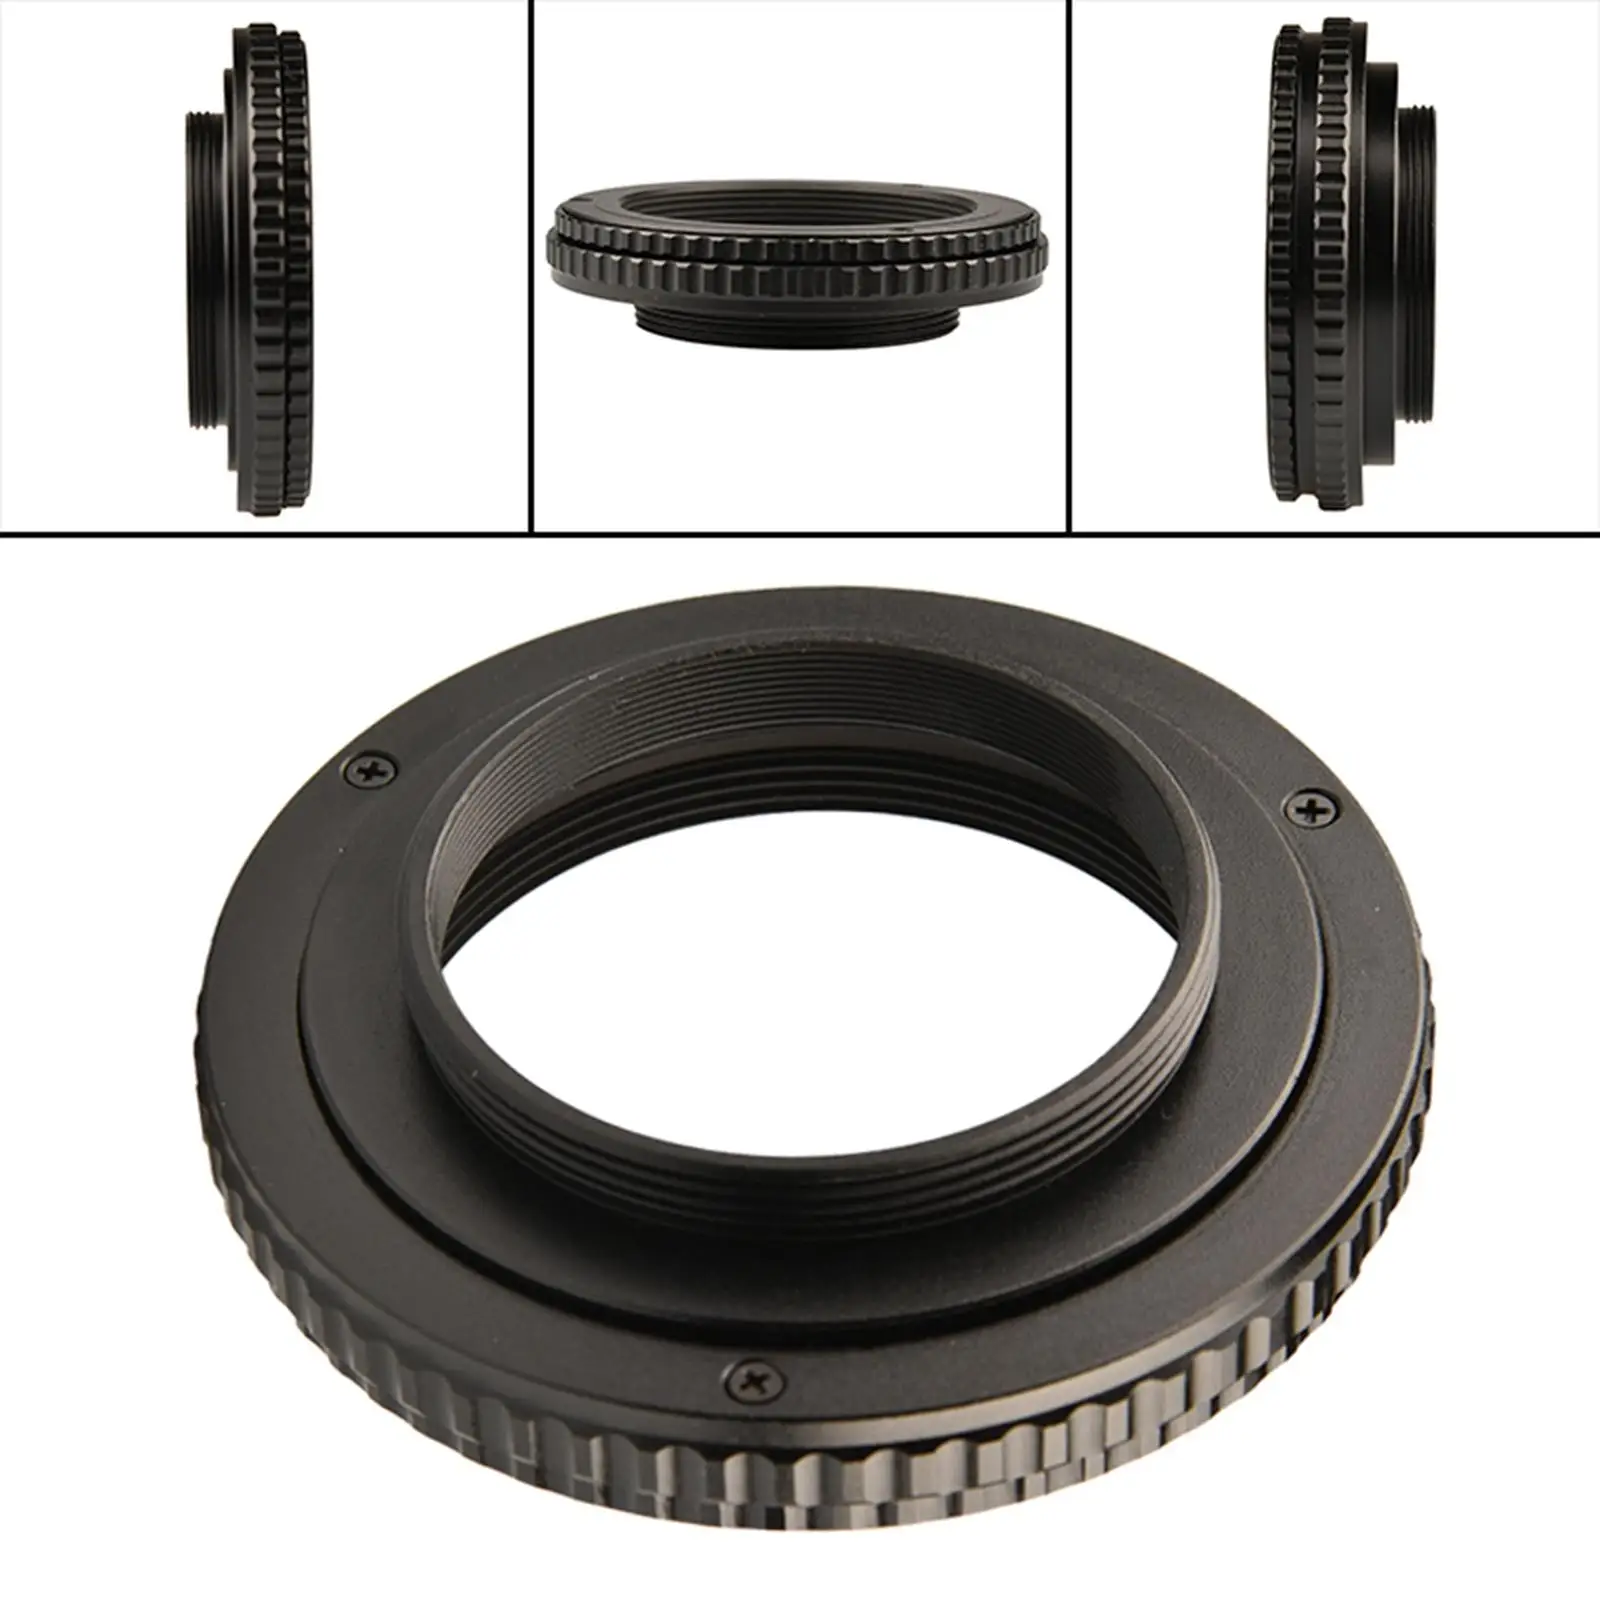 Extension Tube Adapter   Installation Adjustable Focusing for  Photography